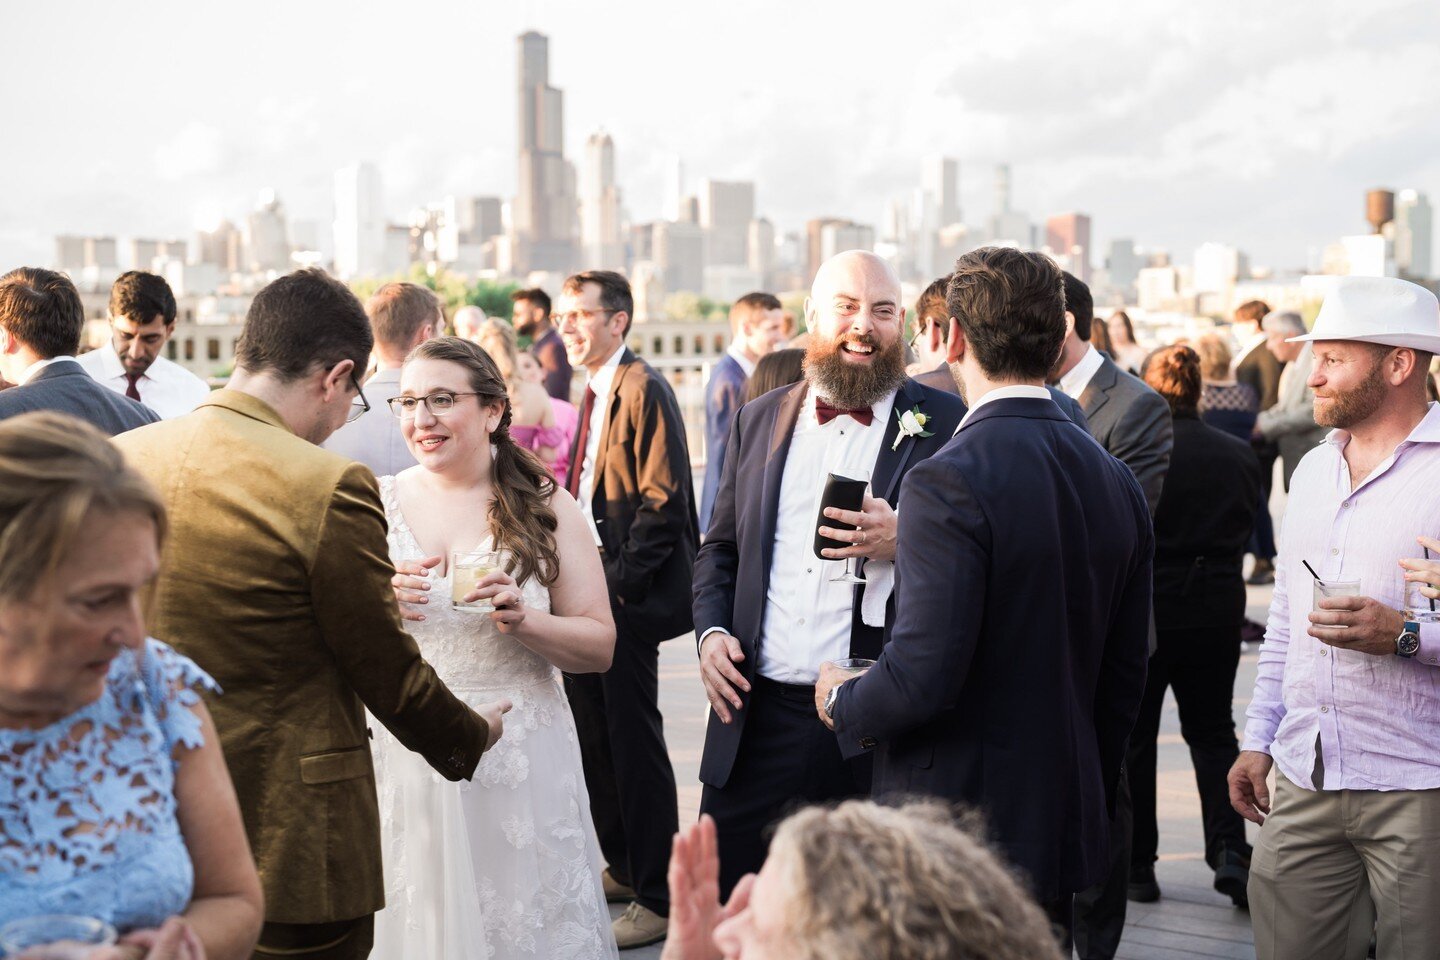 We&rsquo;re so ready for rooftop cocktail hours at @lacunaeventsbylm! Who&rsquo;s with us? 🥂☀️🏙️

📸 @two_birds_photo
.
.
.
#lmcaters #chicagocatering #chicagoeventvenue #cateringchicago #chicagoevents #summerwedding #rooftopwedding #chicagorooftop